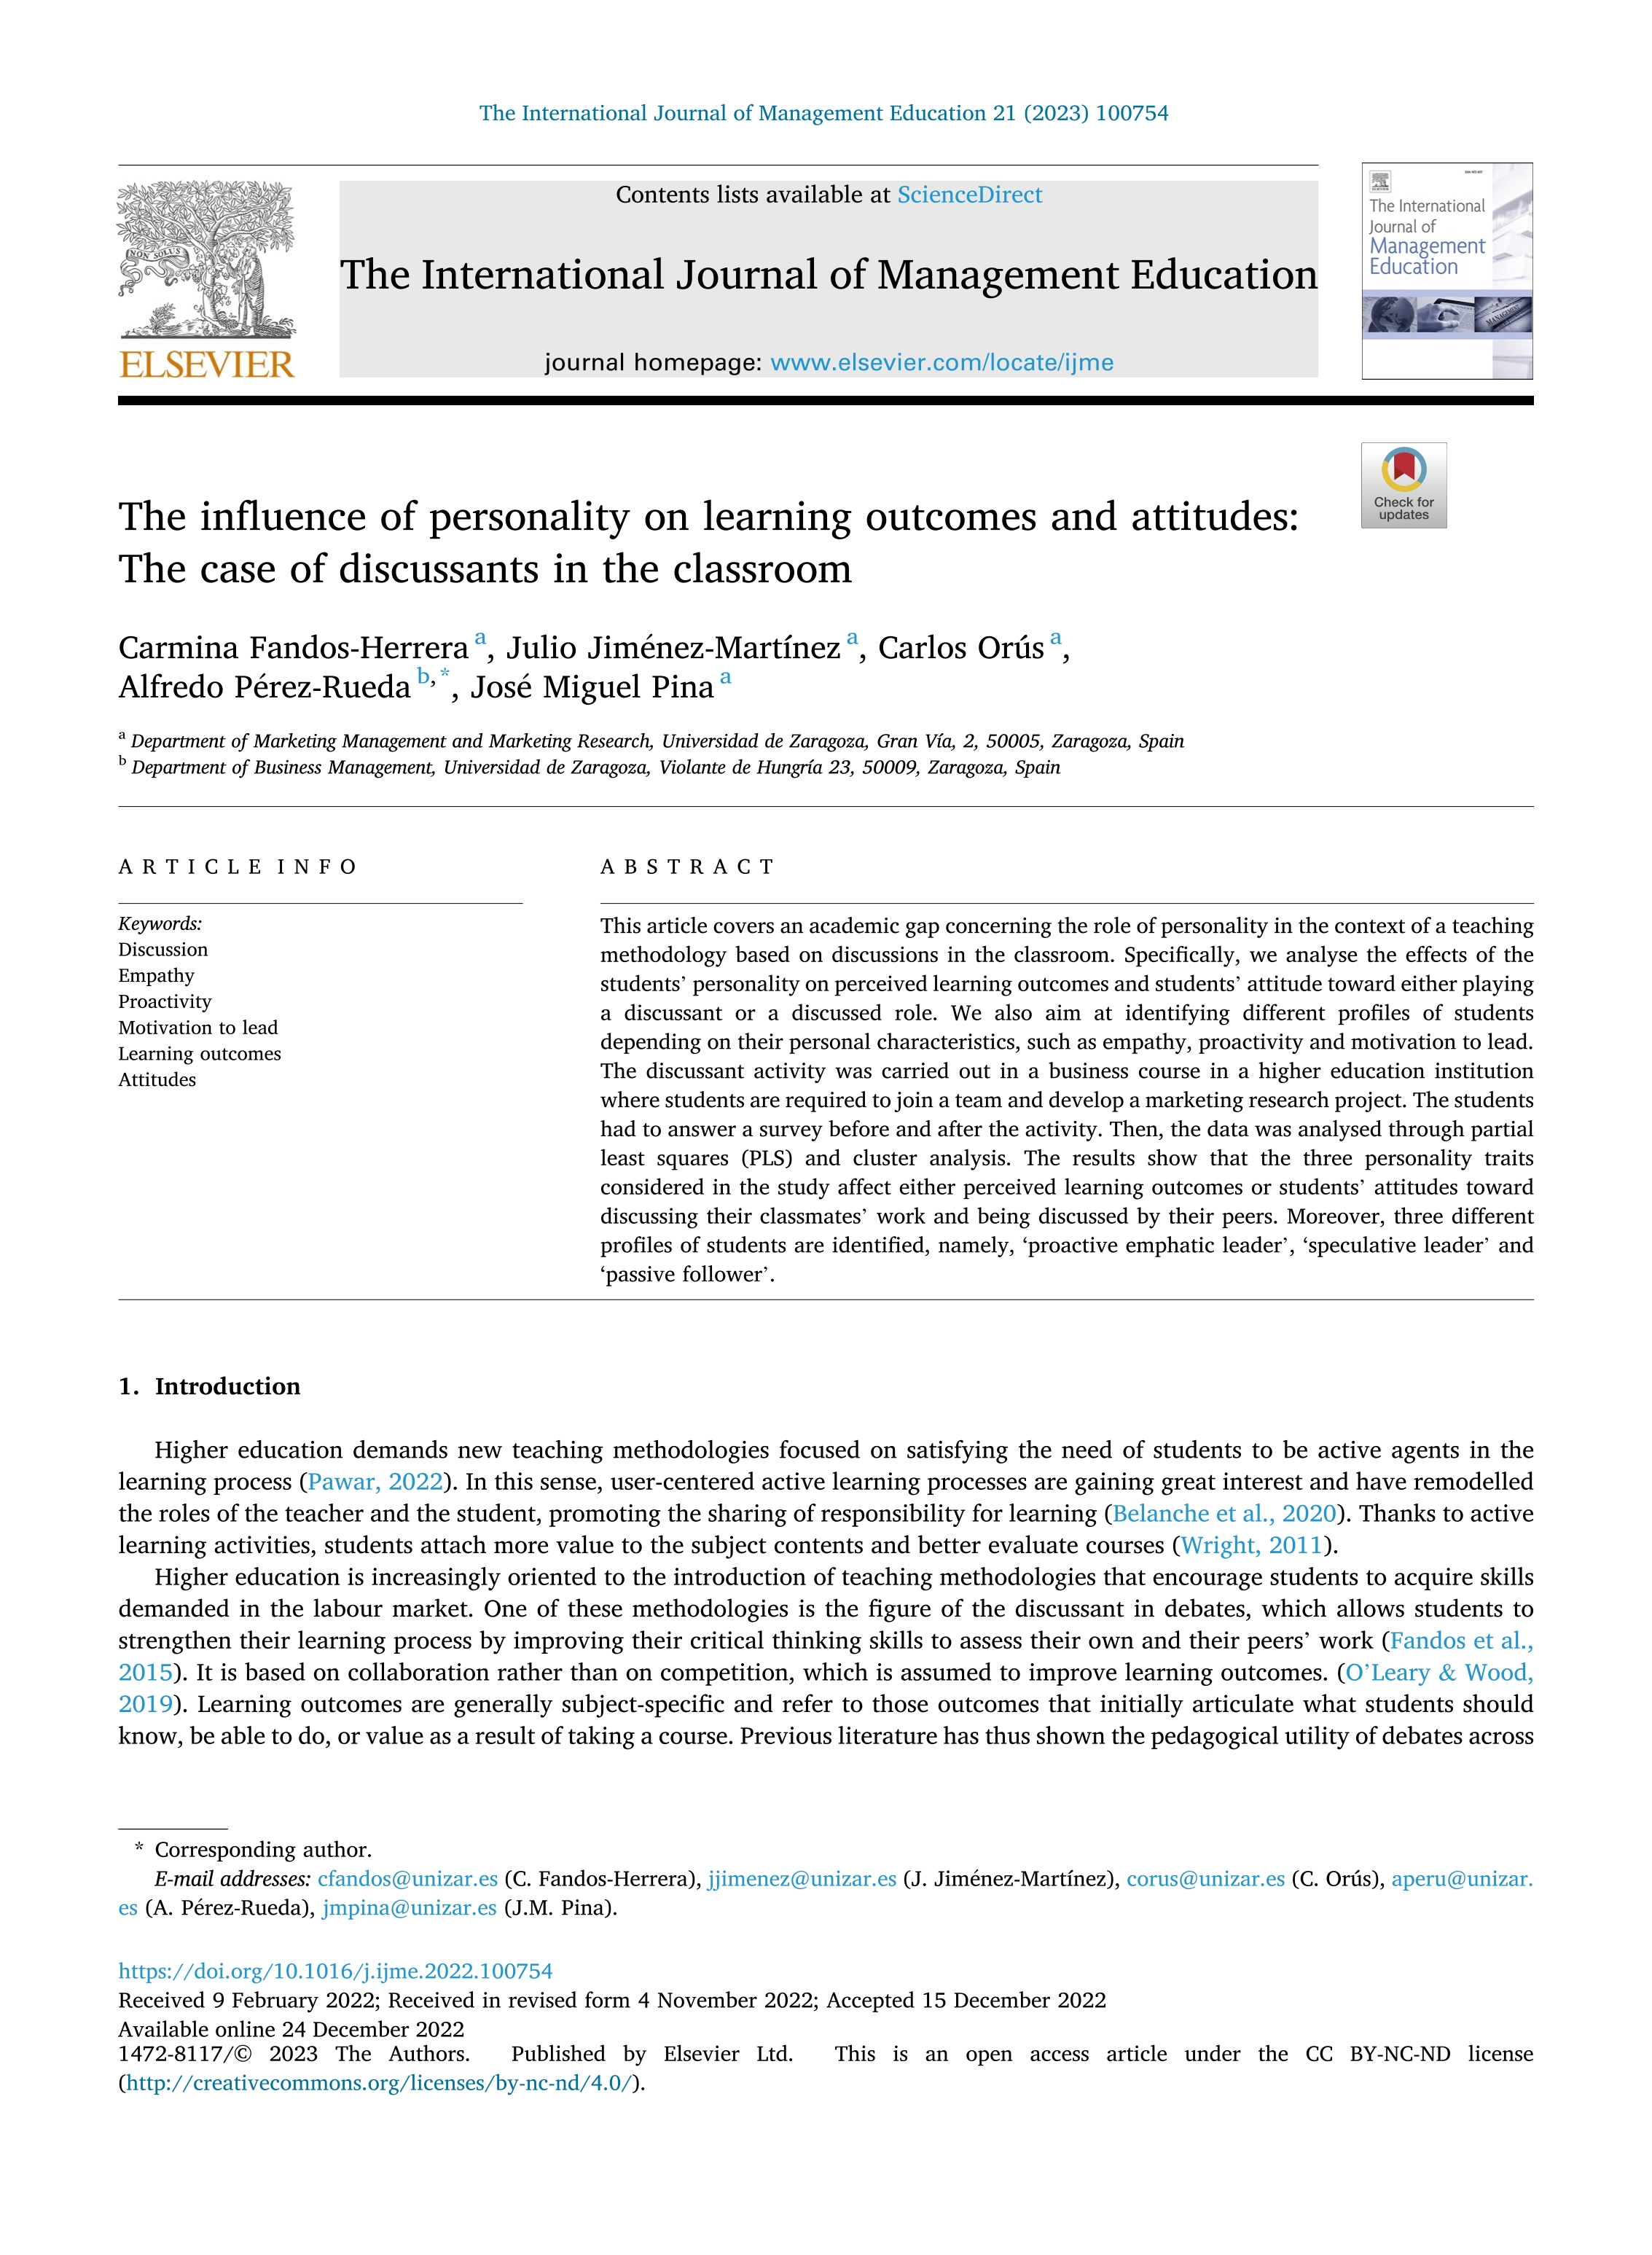 The influence of personality on learning outcomes and attitudes: The case of discussants in the classroom